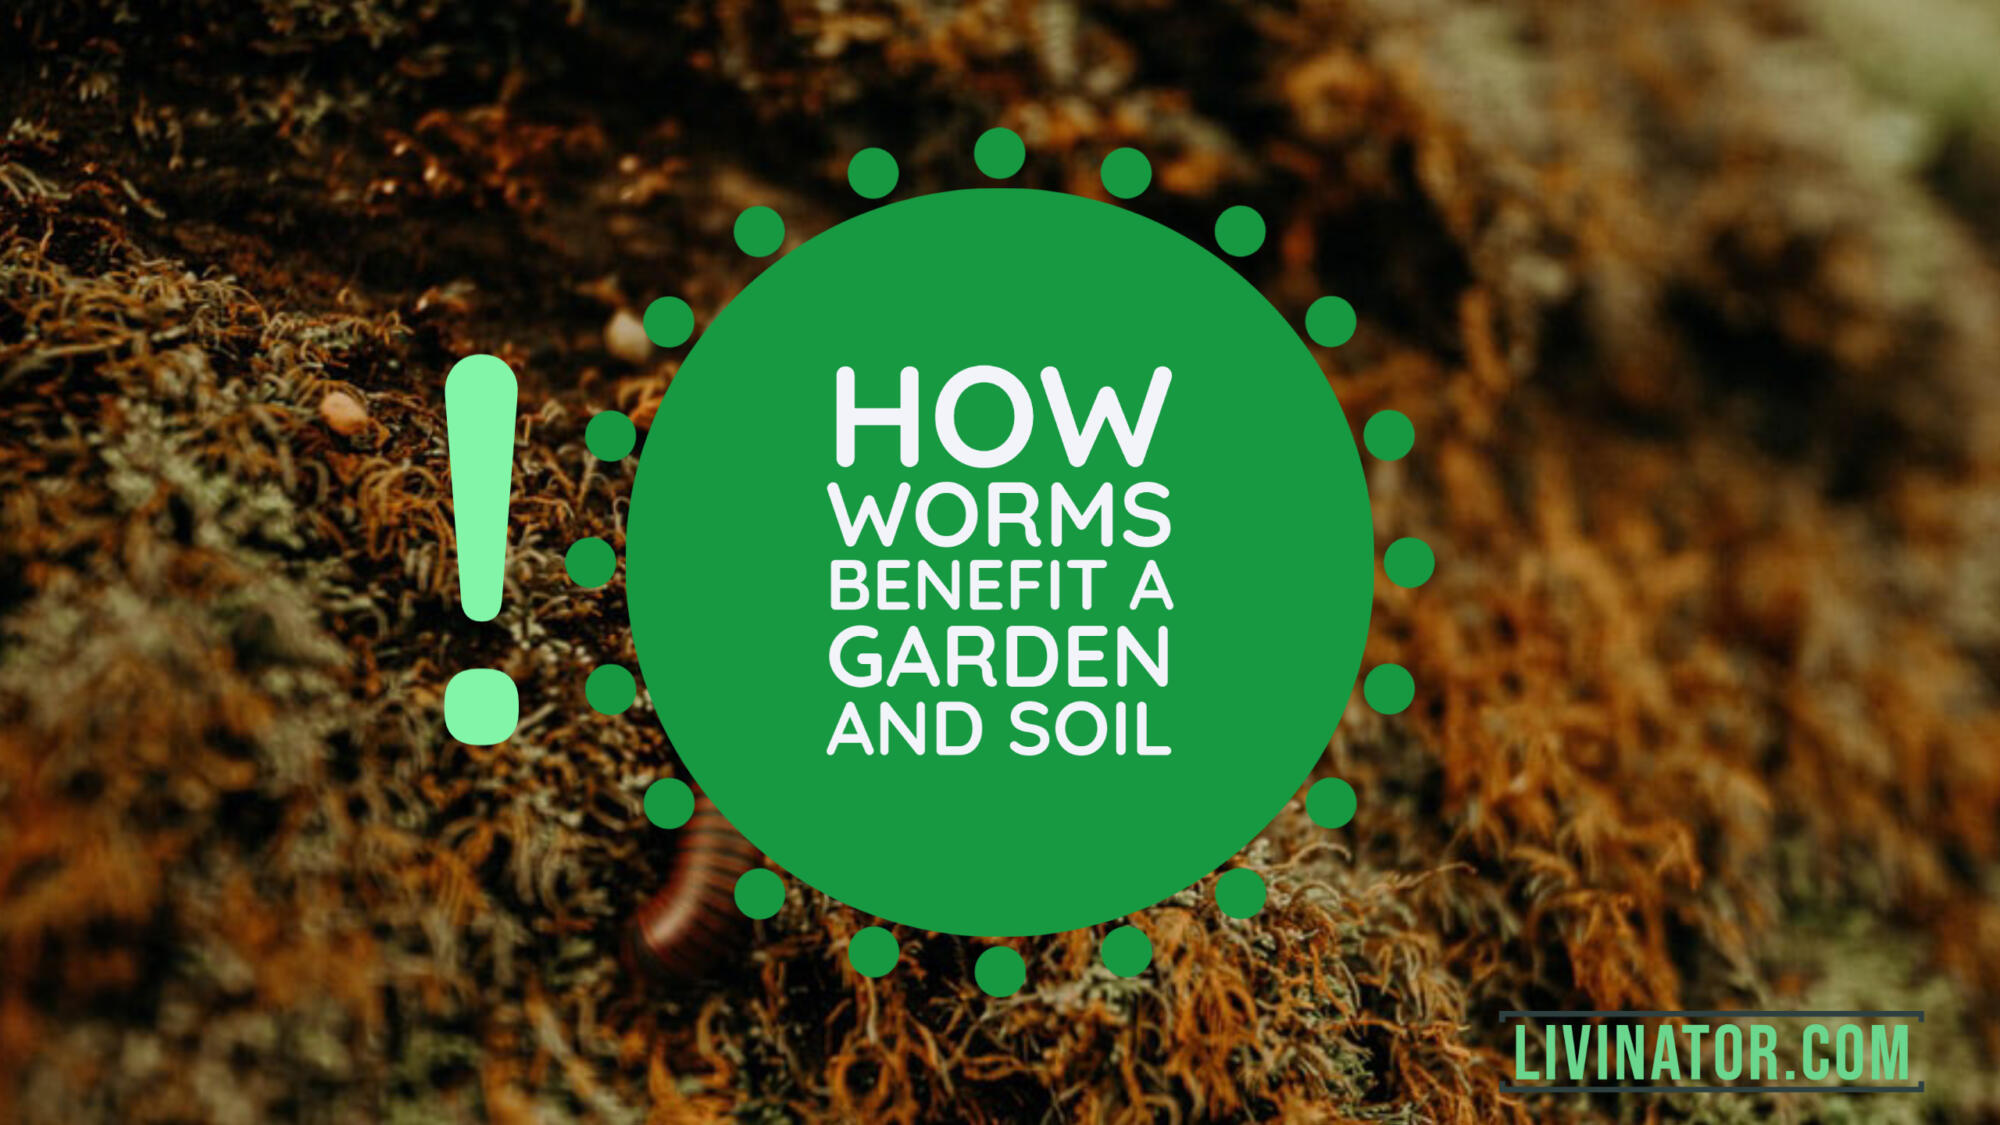 Worms benefit soil.